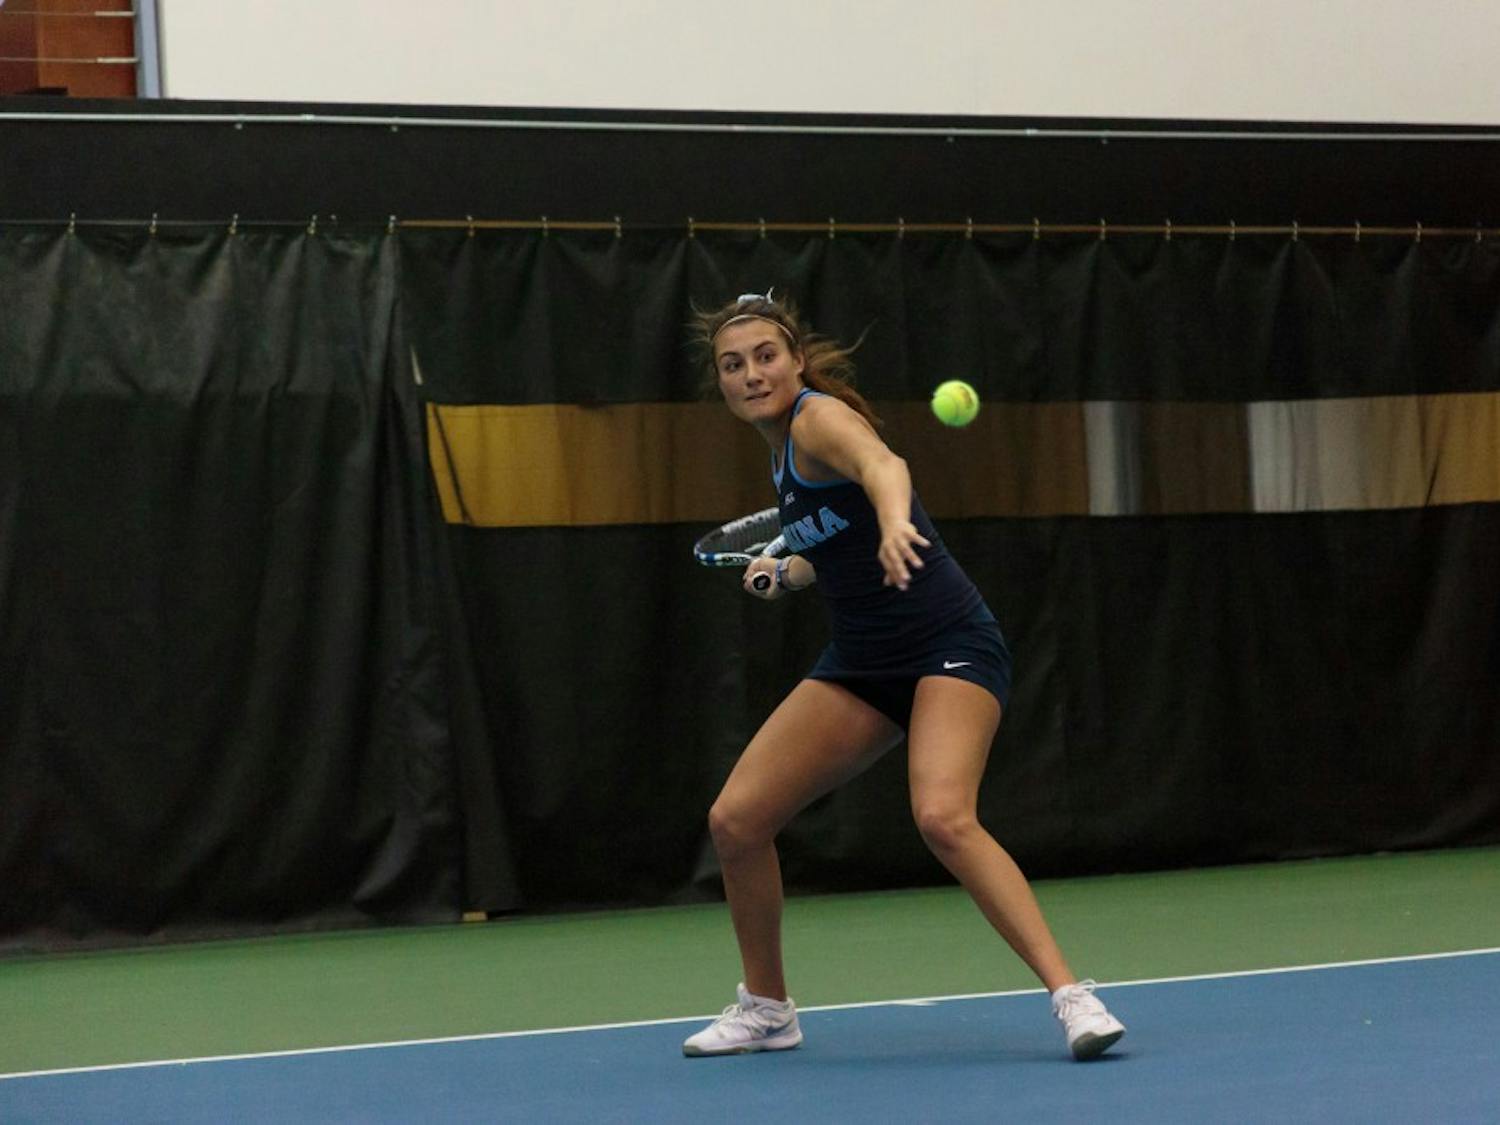 Alexa Graham winds up to hit the ball during a singles match against Georgia Tech on Saturday..